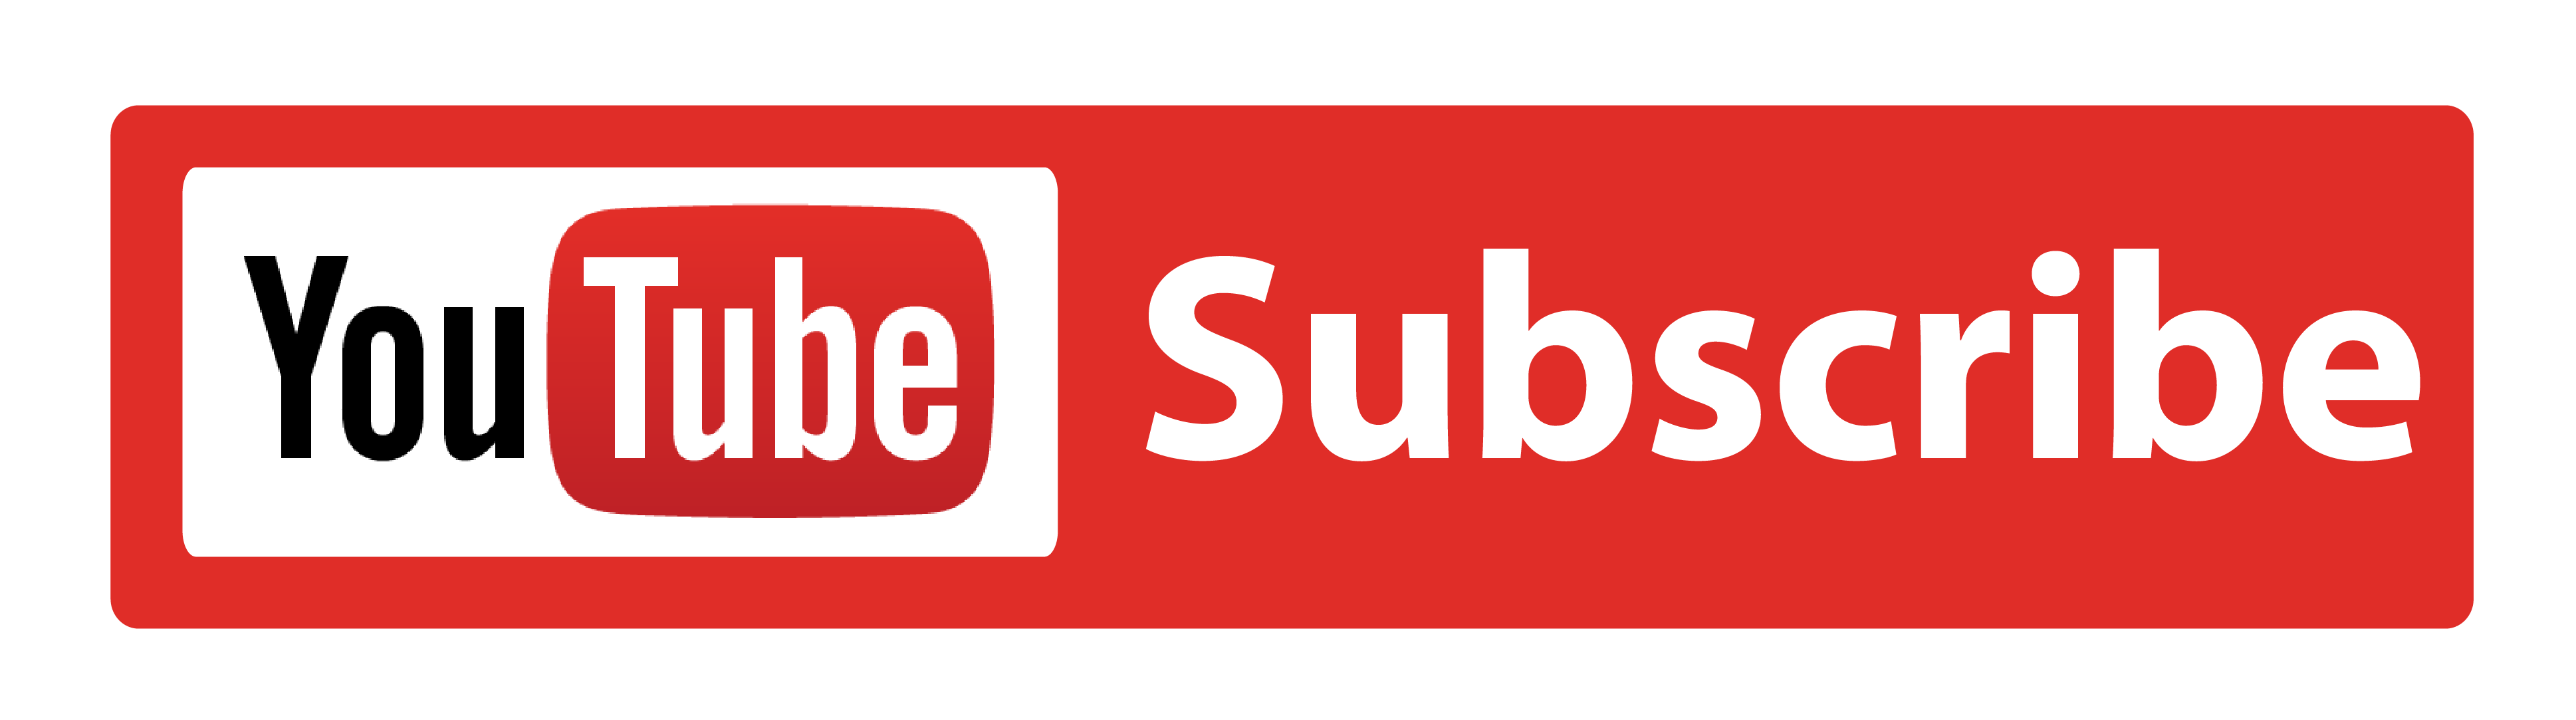 Subscribe Button Png Download Png Image Subscribe Png Png Images